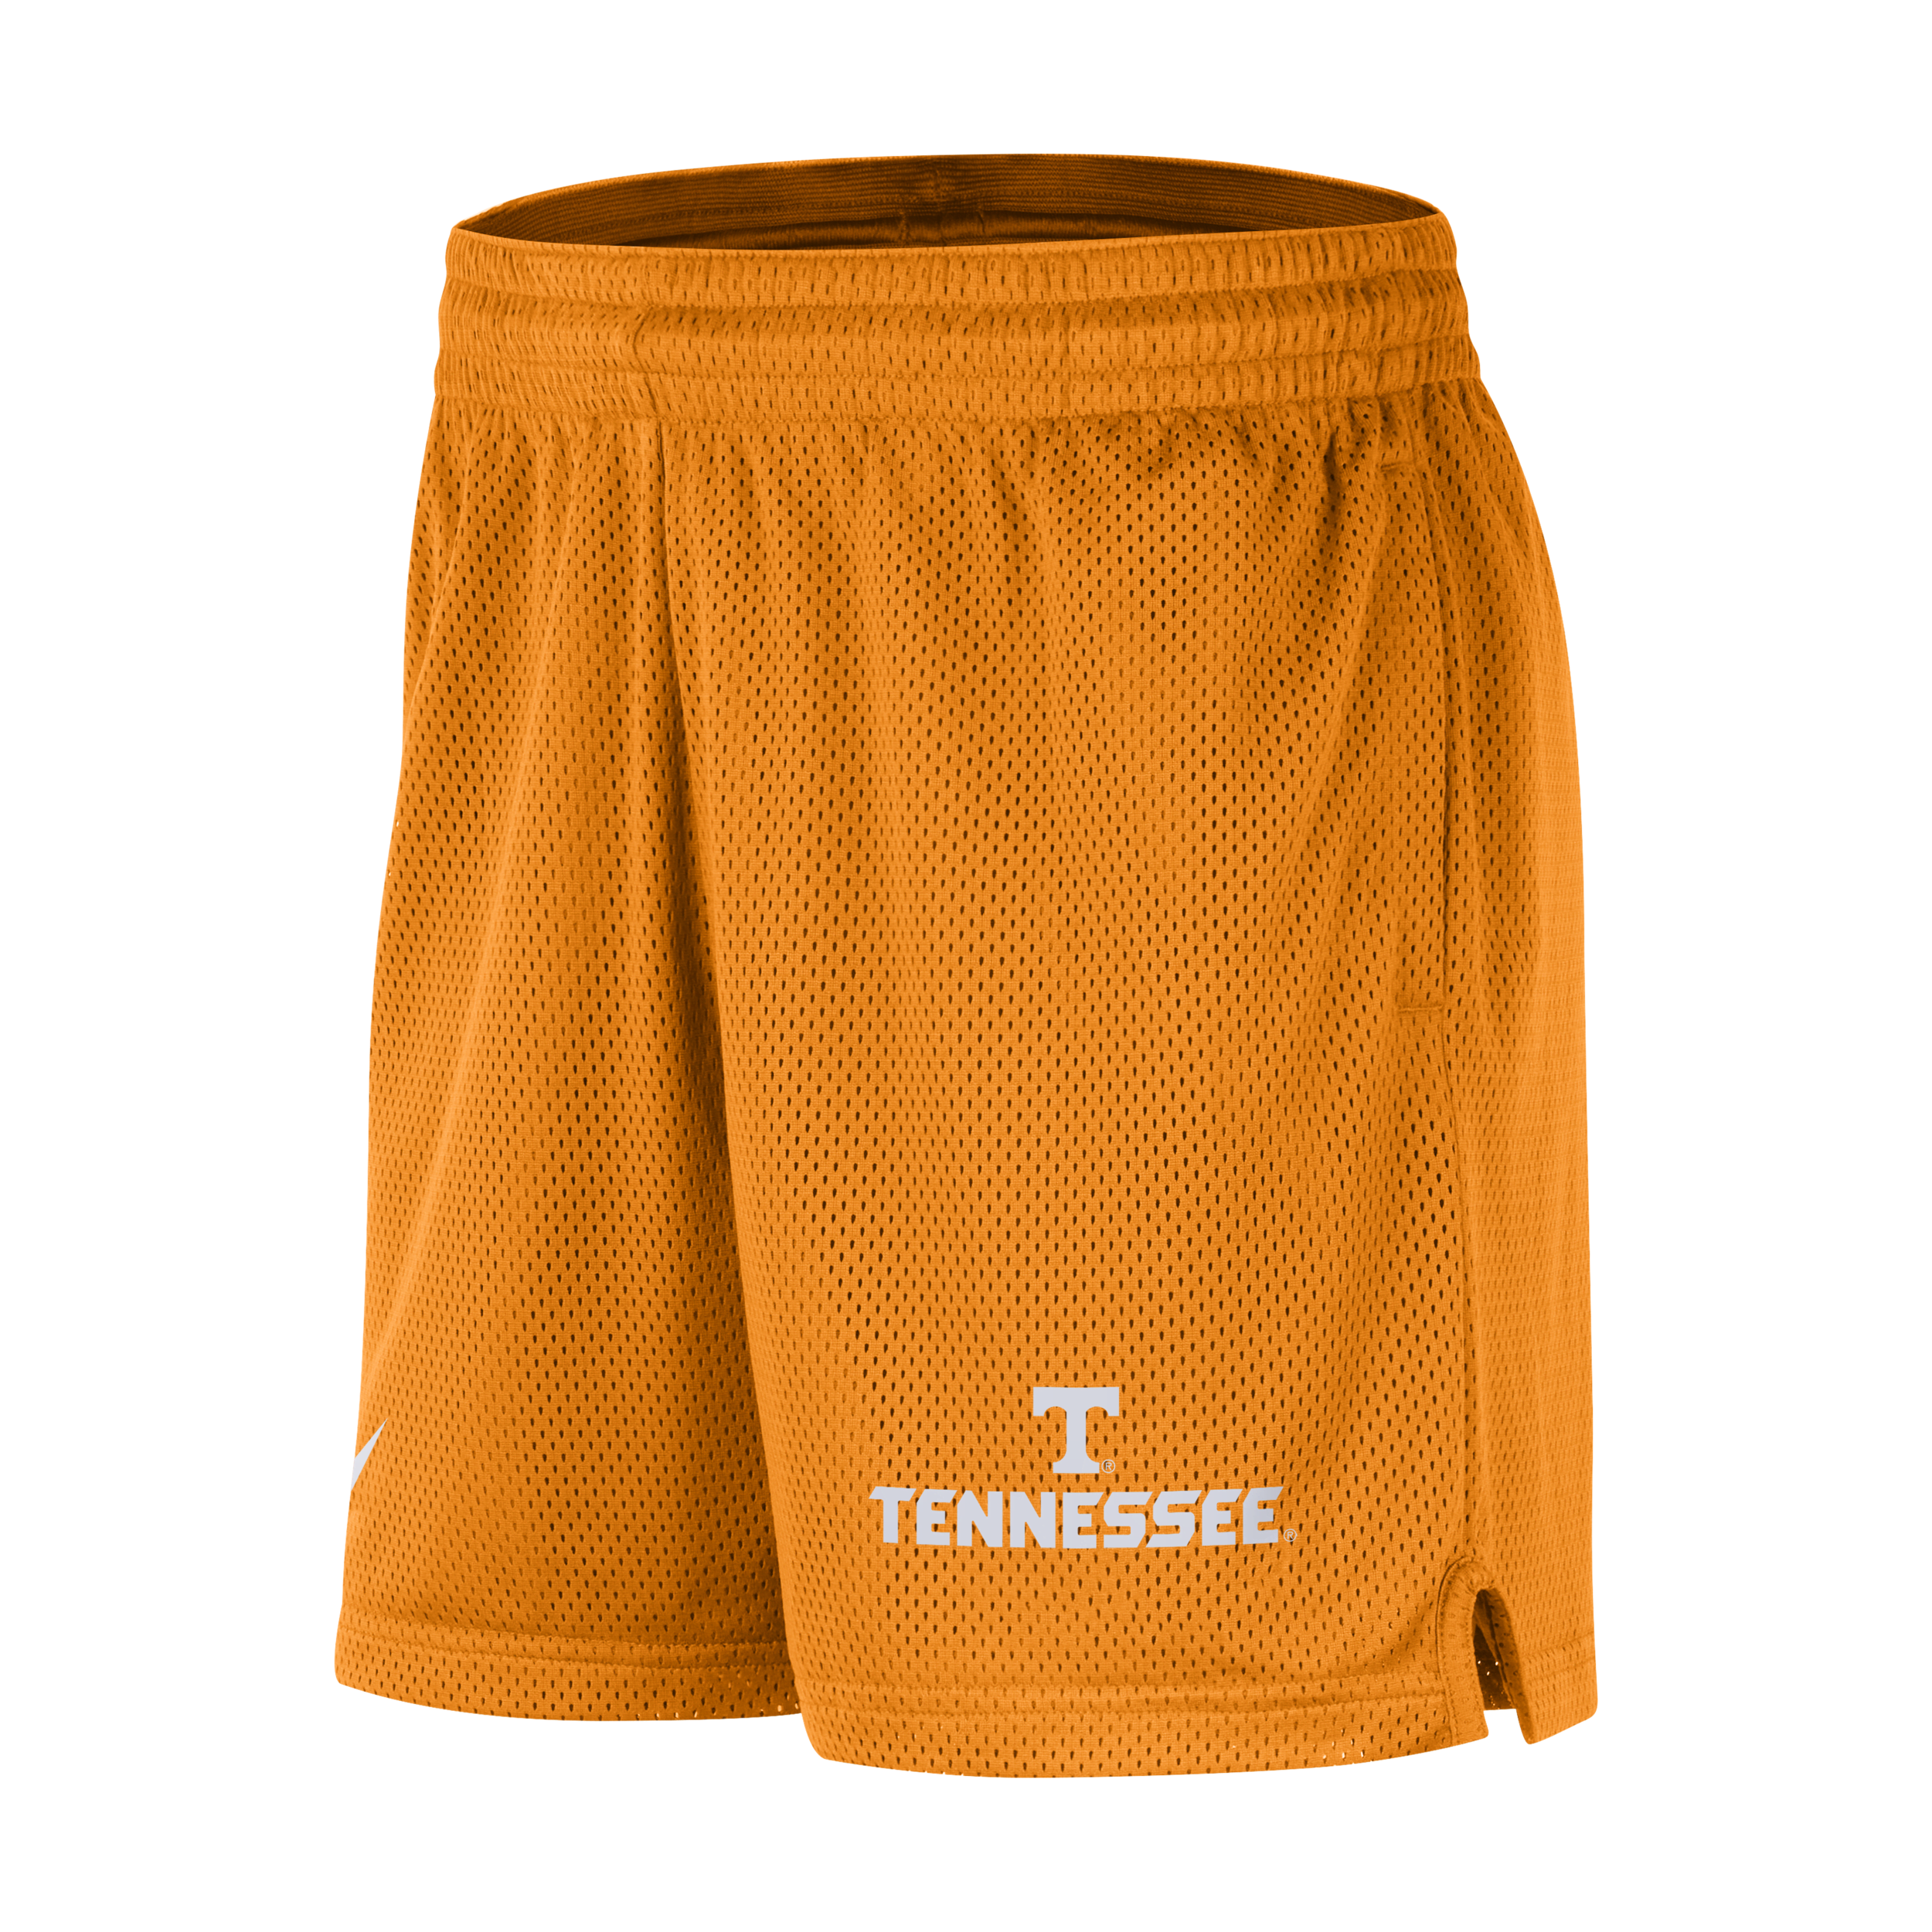 NIKE TENNESSEE  MEN'S DRI-FIT COLLEGE KNIT SHORTS,1010109592